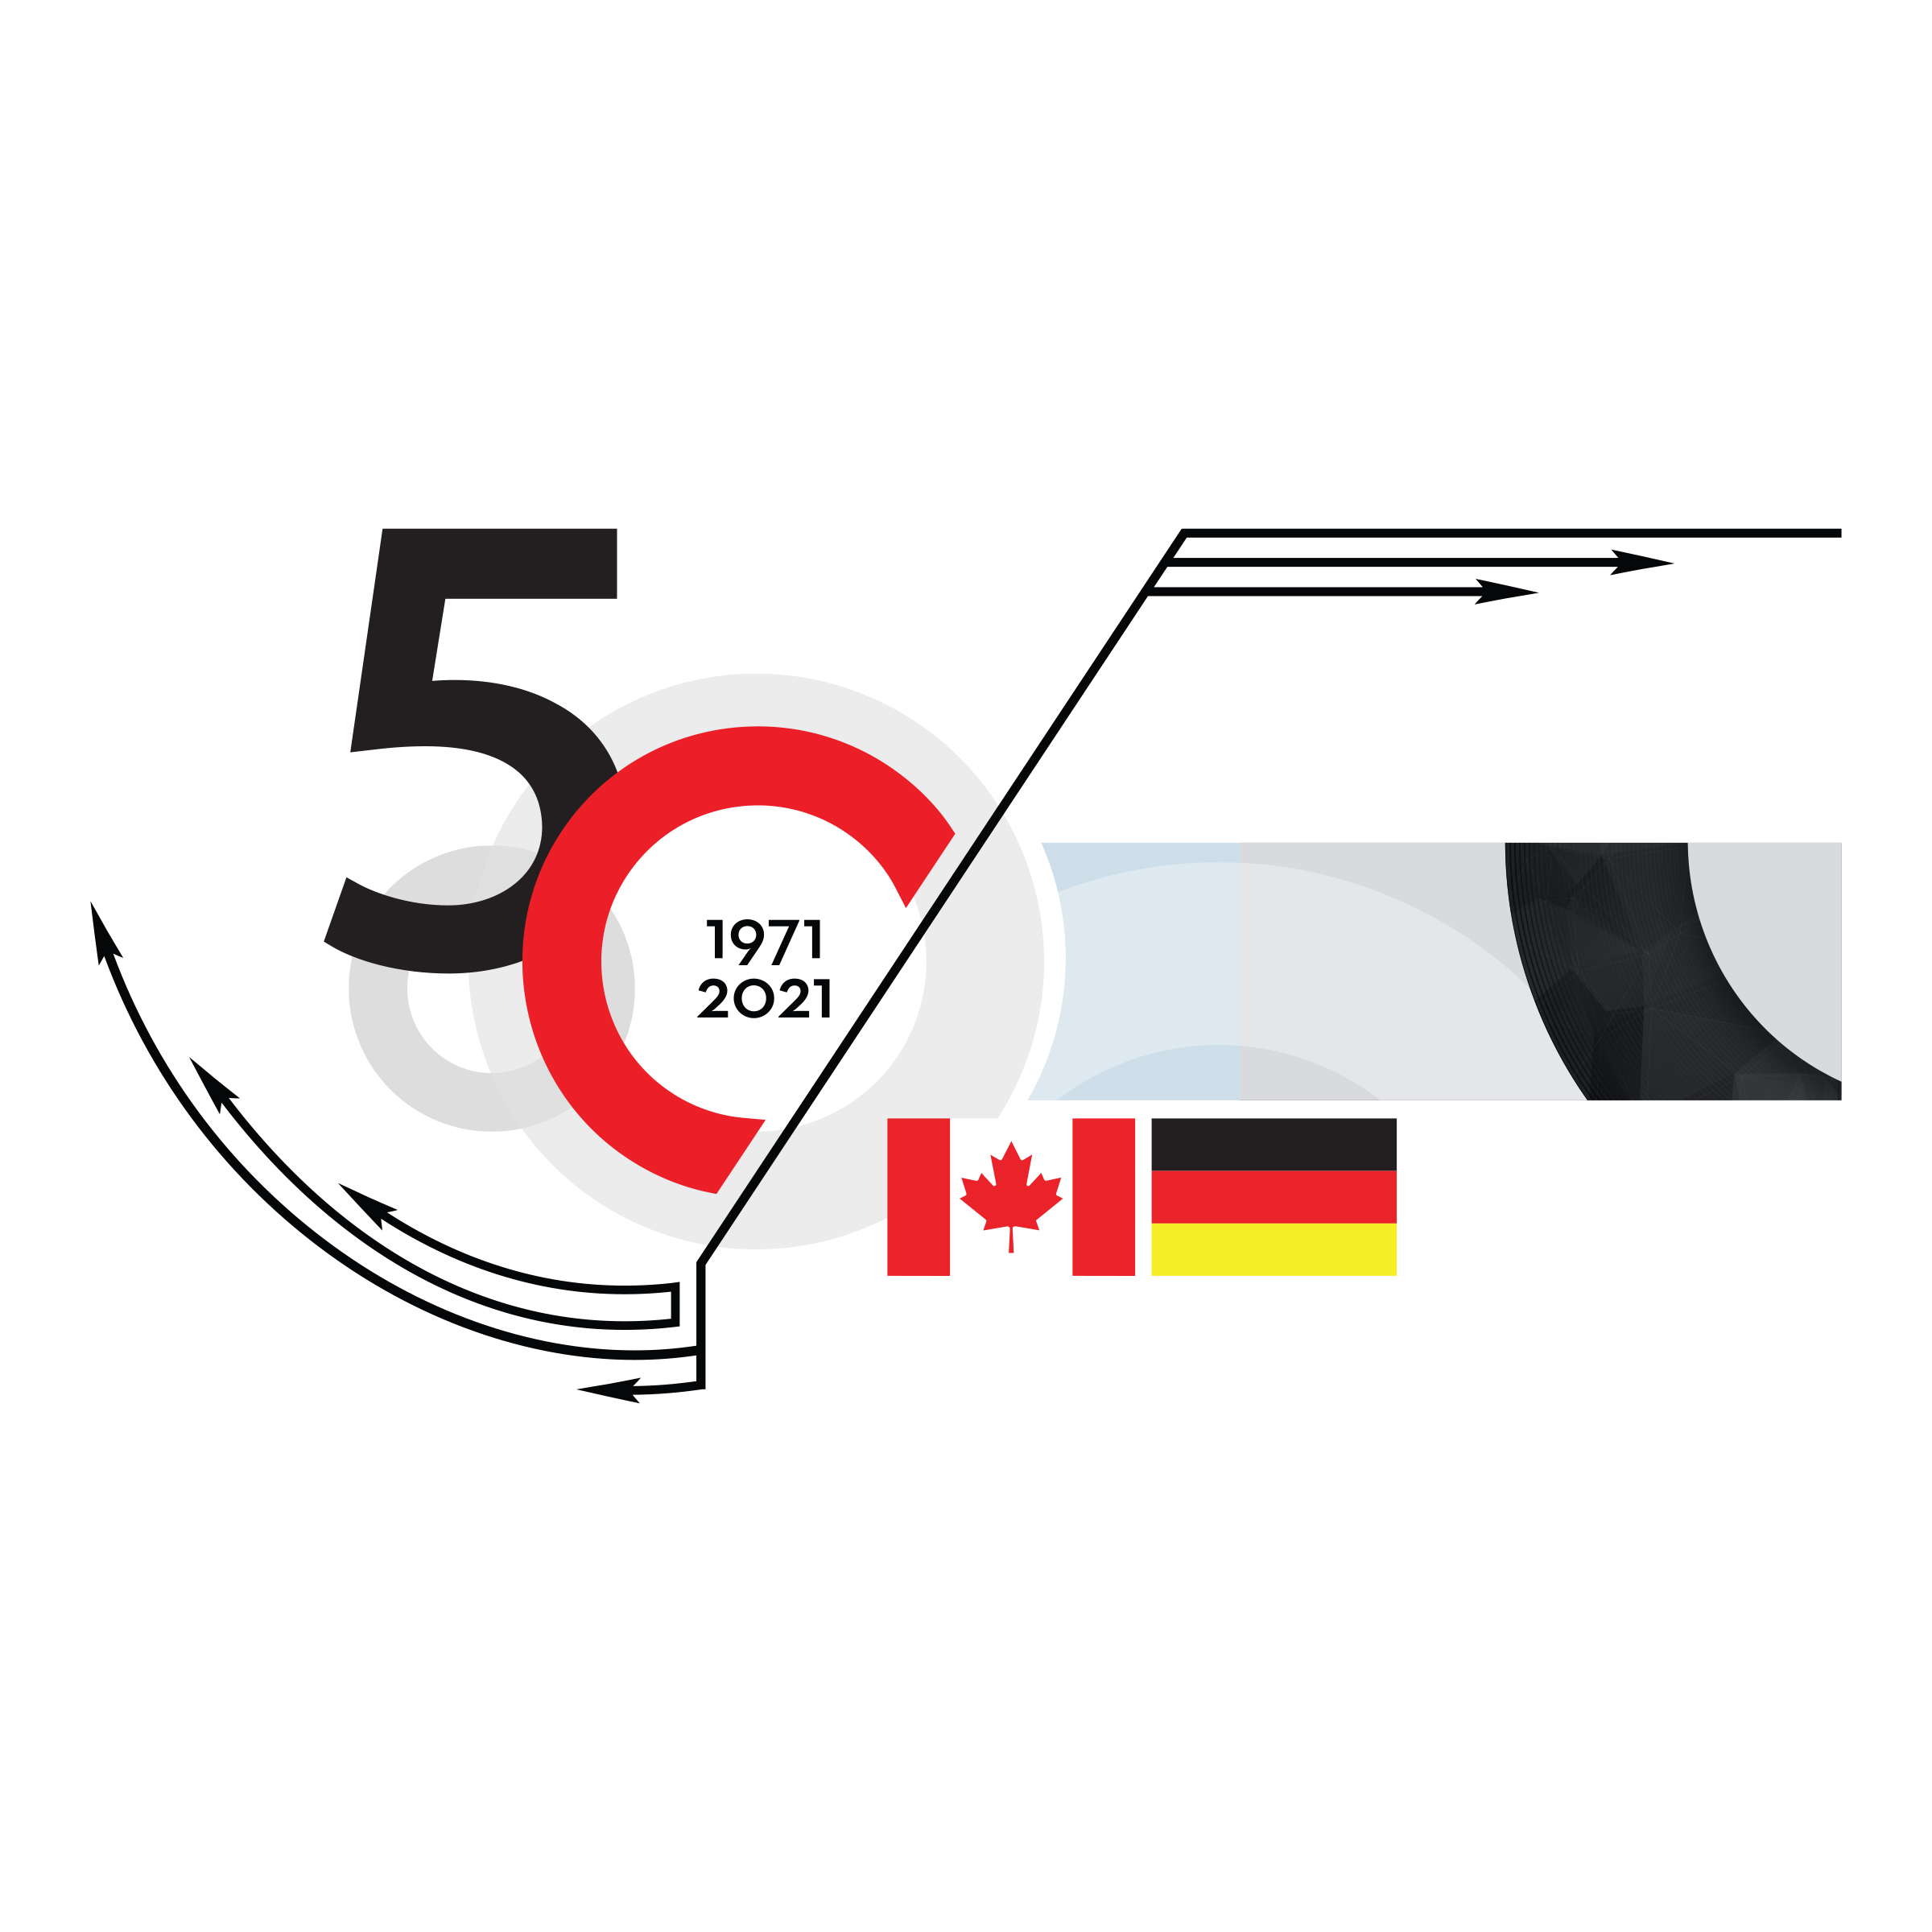 50th Anniversary of the STI collaboration between Canada and Germany